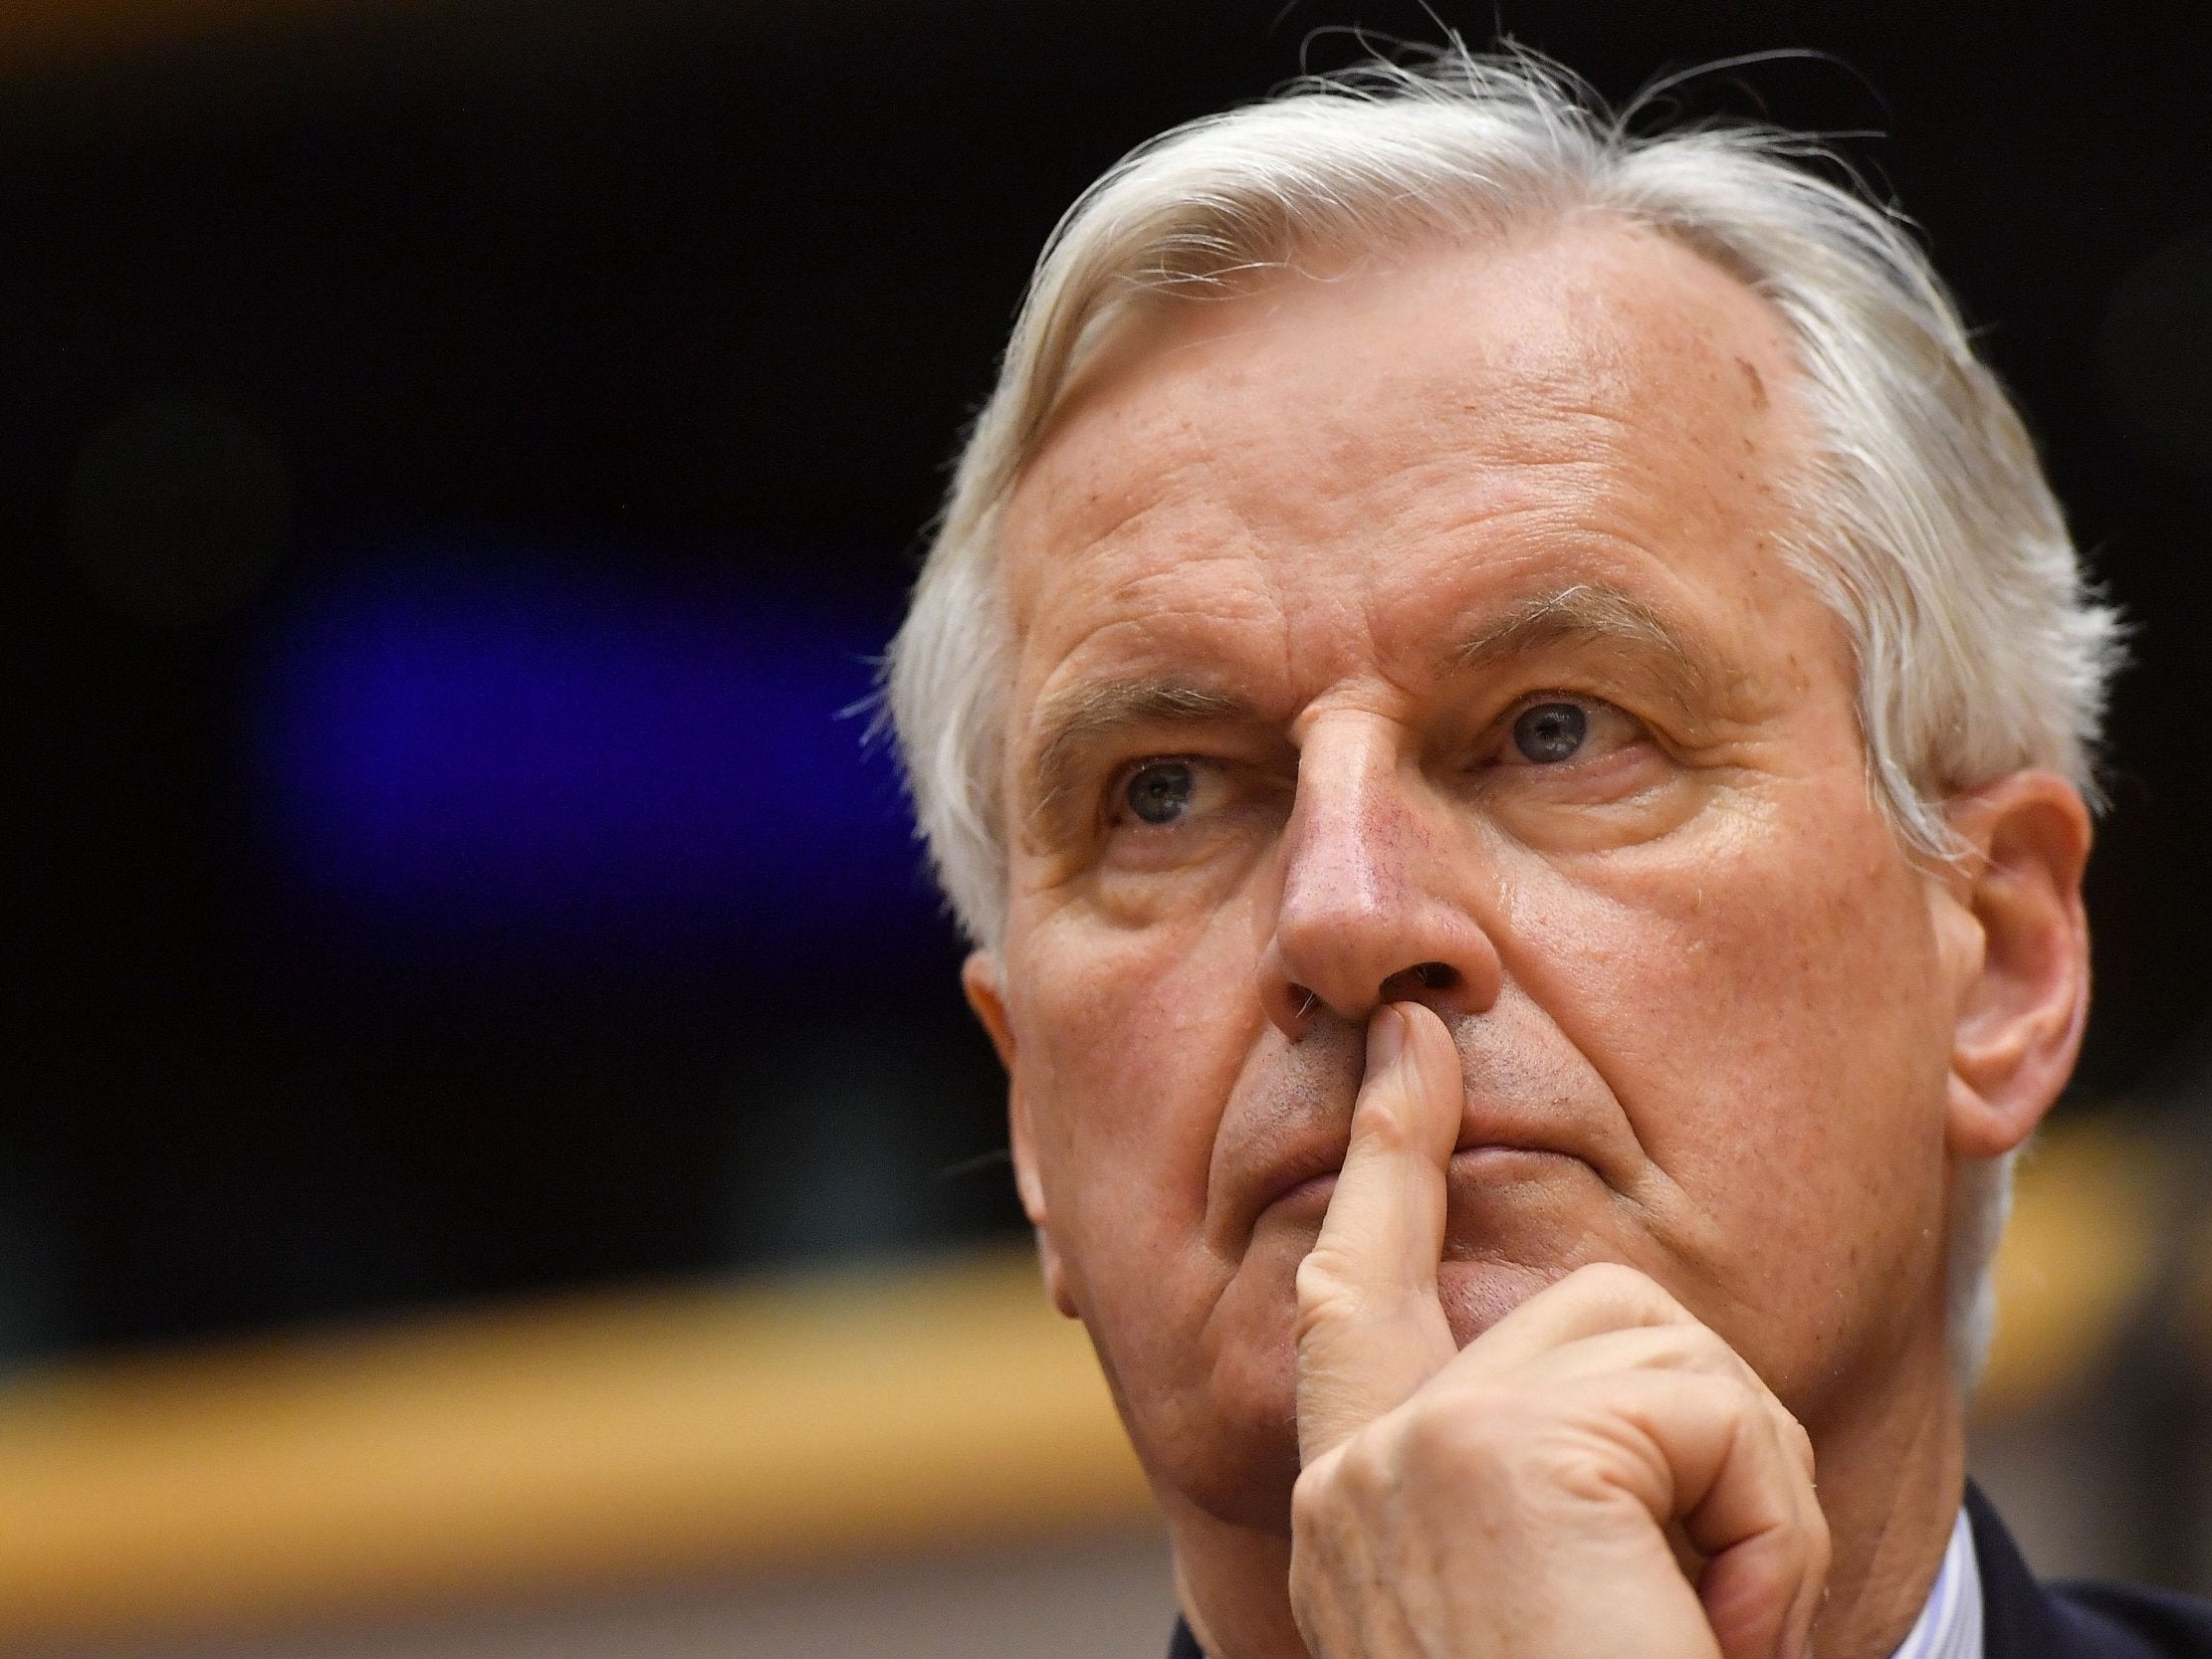 Brexit: Theresa May's deal is 'only option' for Tory leadership candidates to avoid no deal, says Barnier